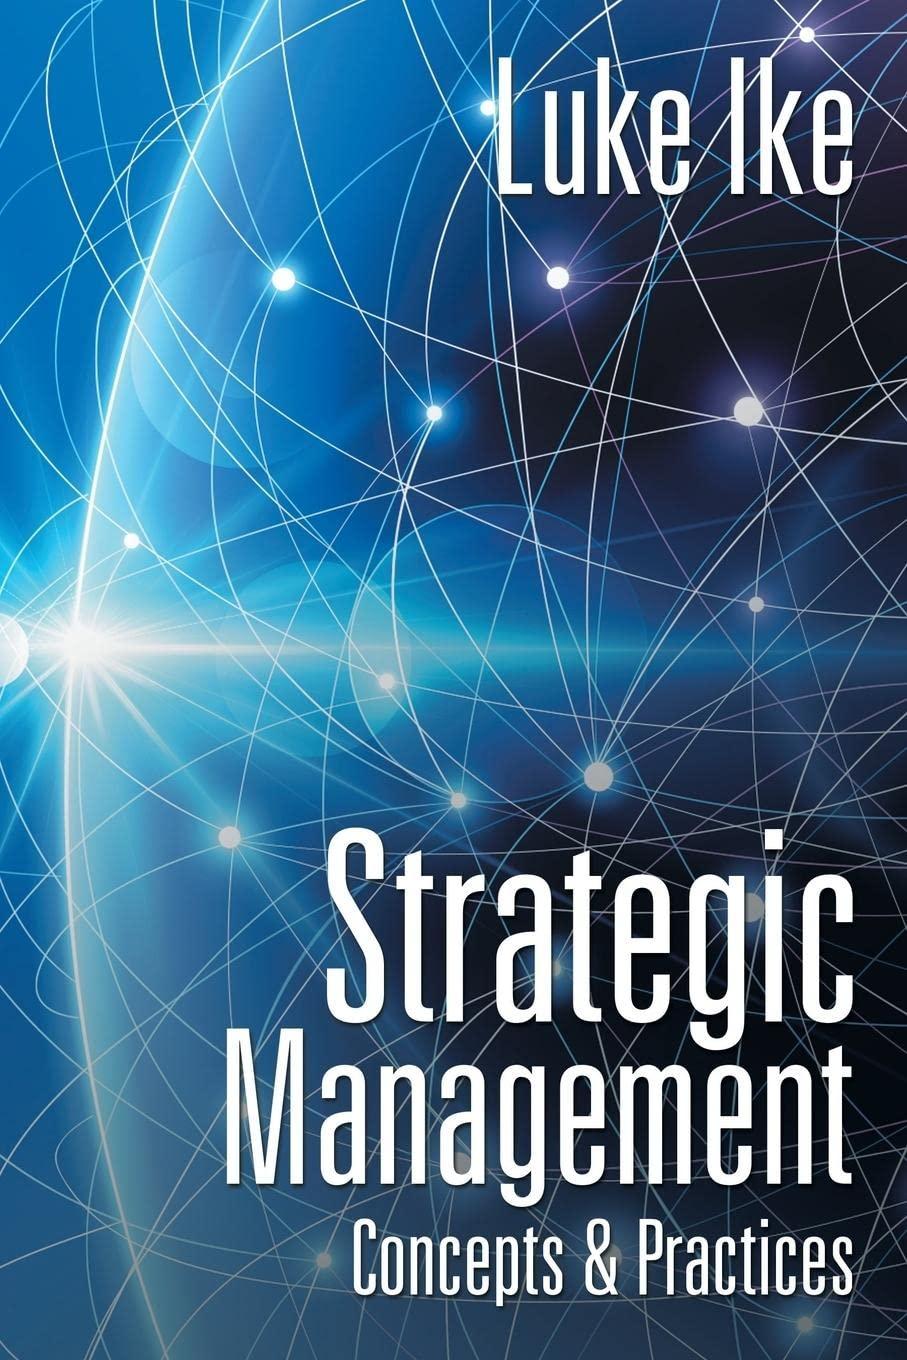 strategic management  concepts and practices 1st edition luke ike 1524597589, 978-1524597580